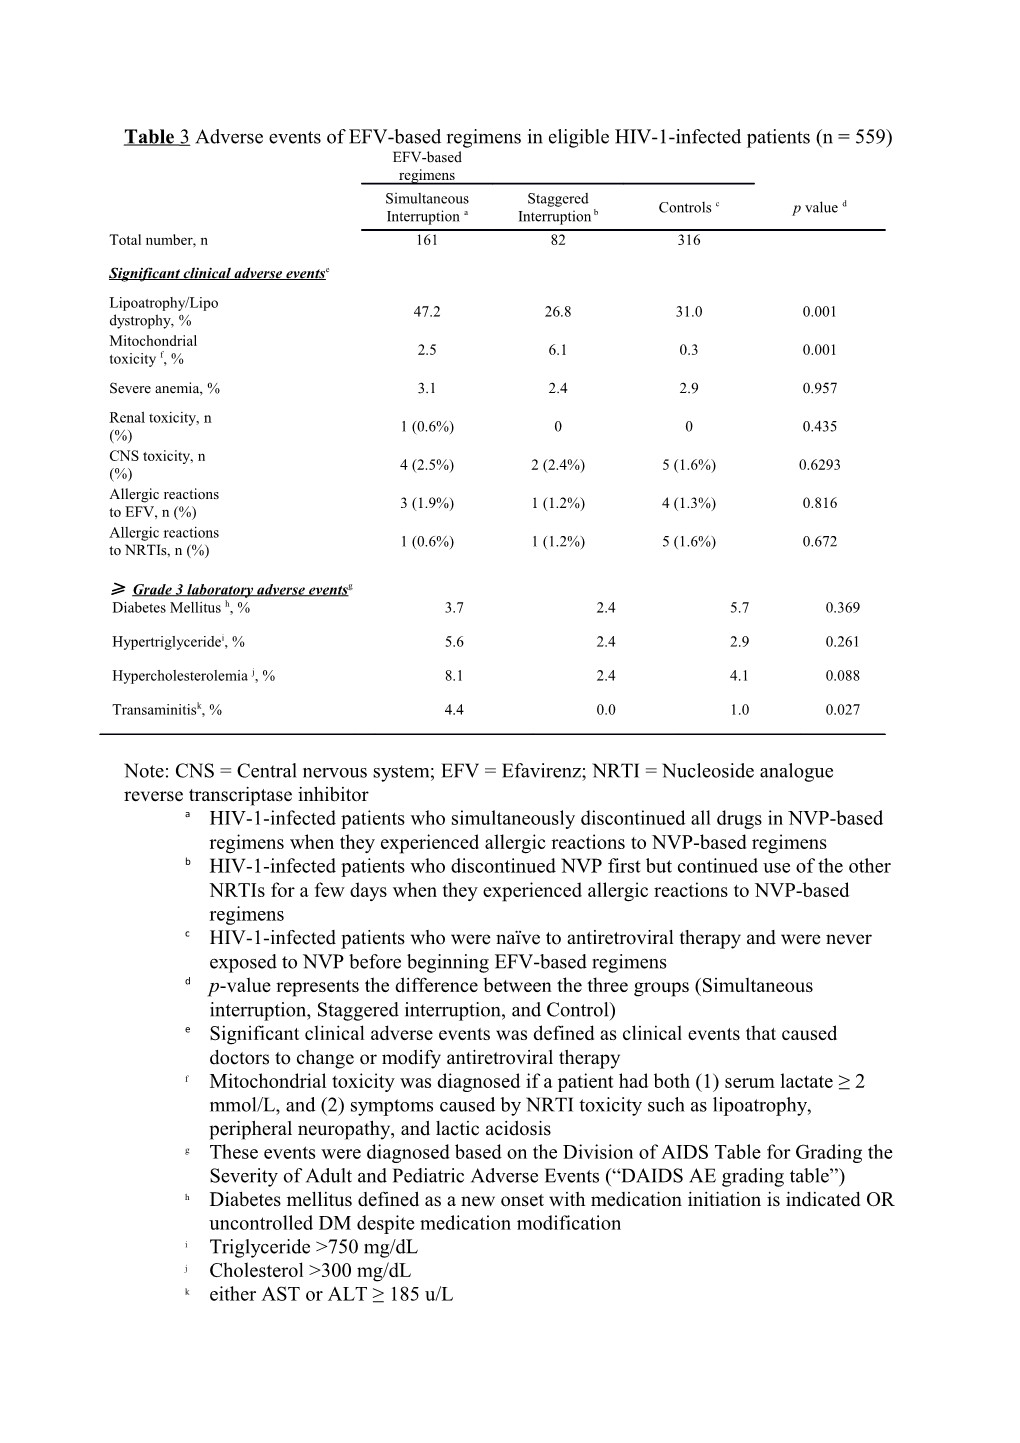 Table 3 Adverse Events of EFV-Based Regimens in Eligible HIV-1-Infected Patients (N = 559)